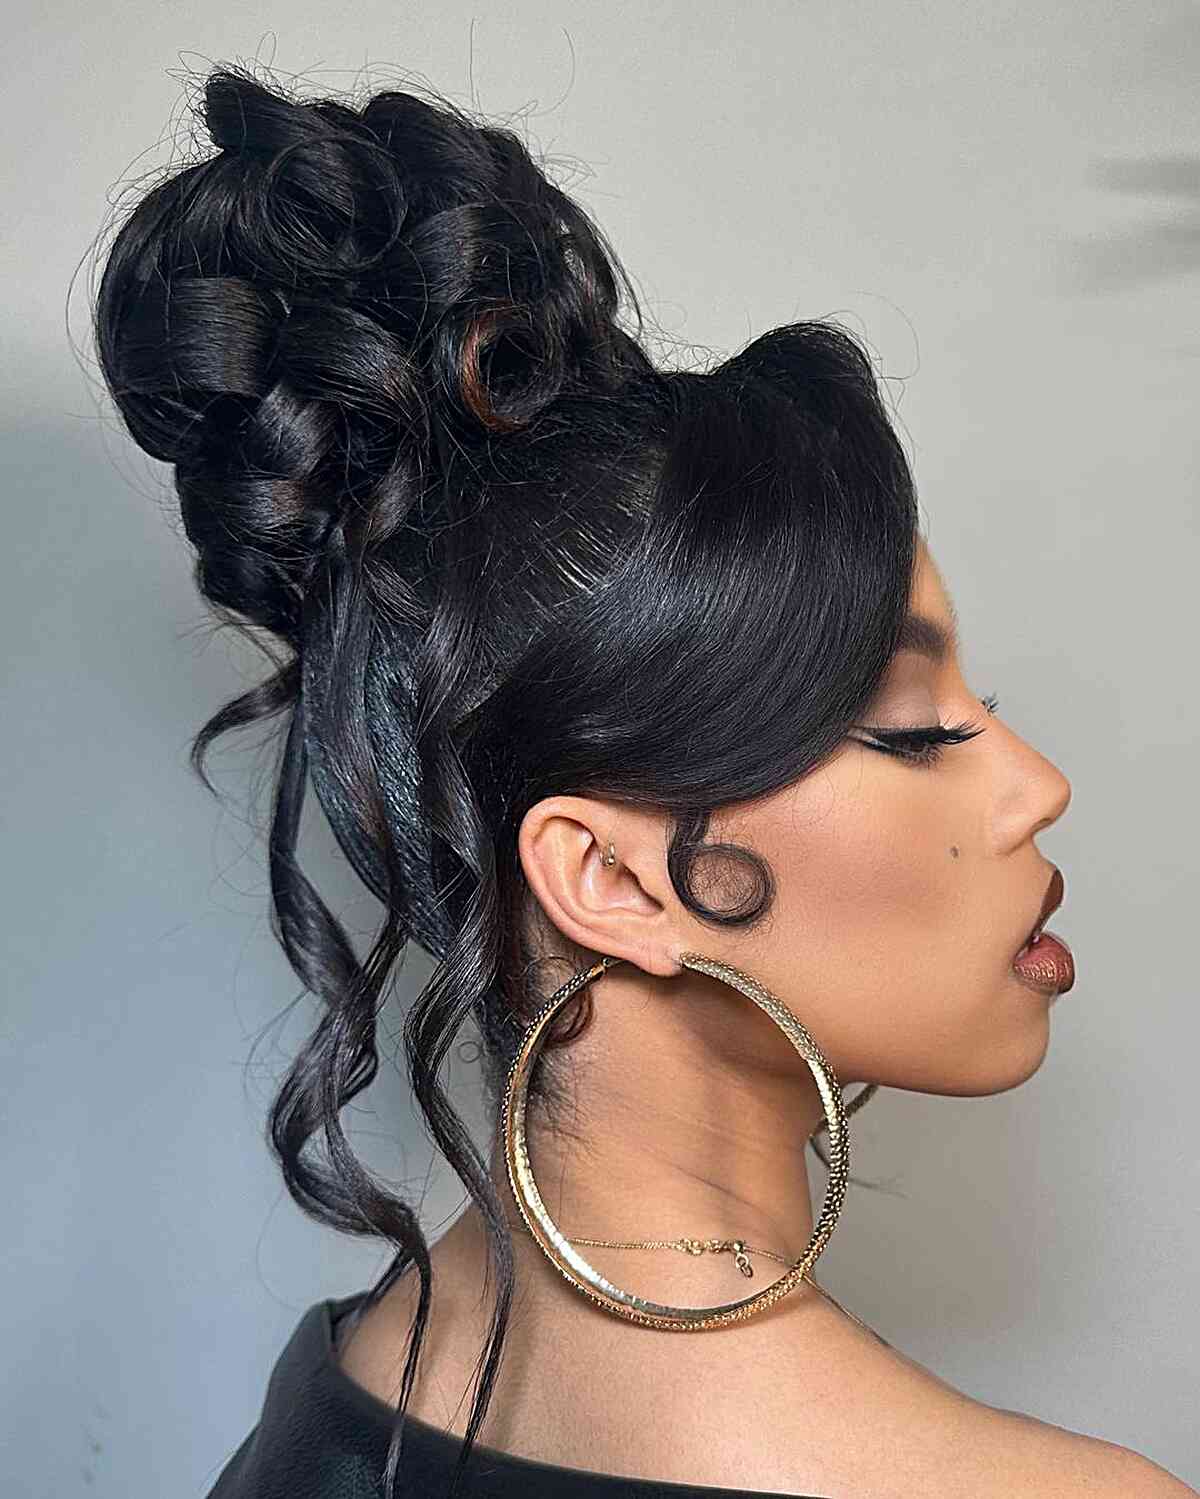 '90s Updo with Barrel Curls with Side Fringe for a Black Woman